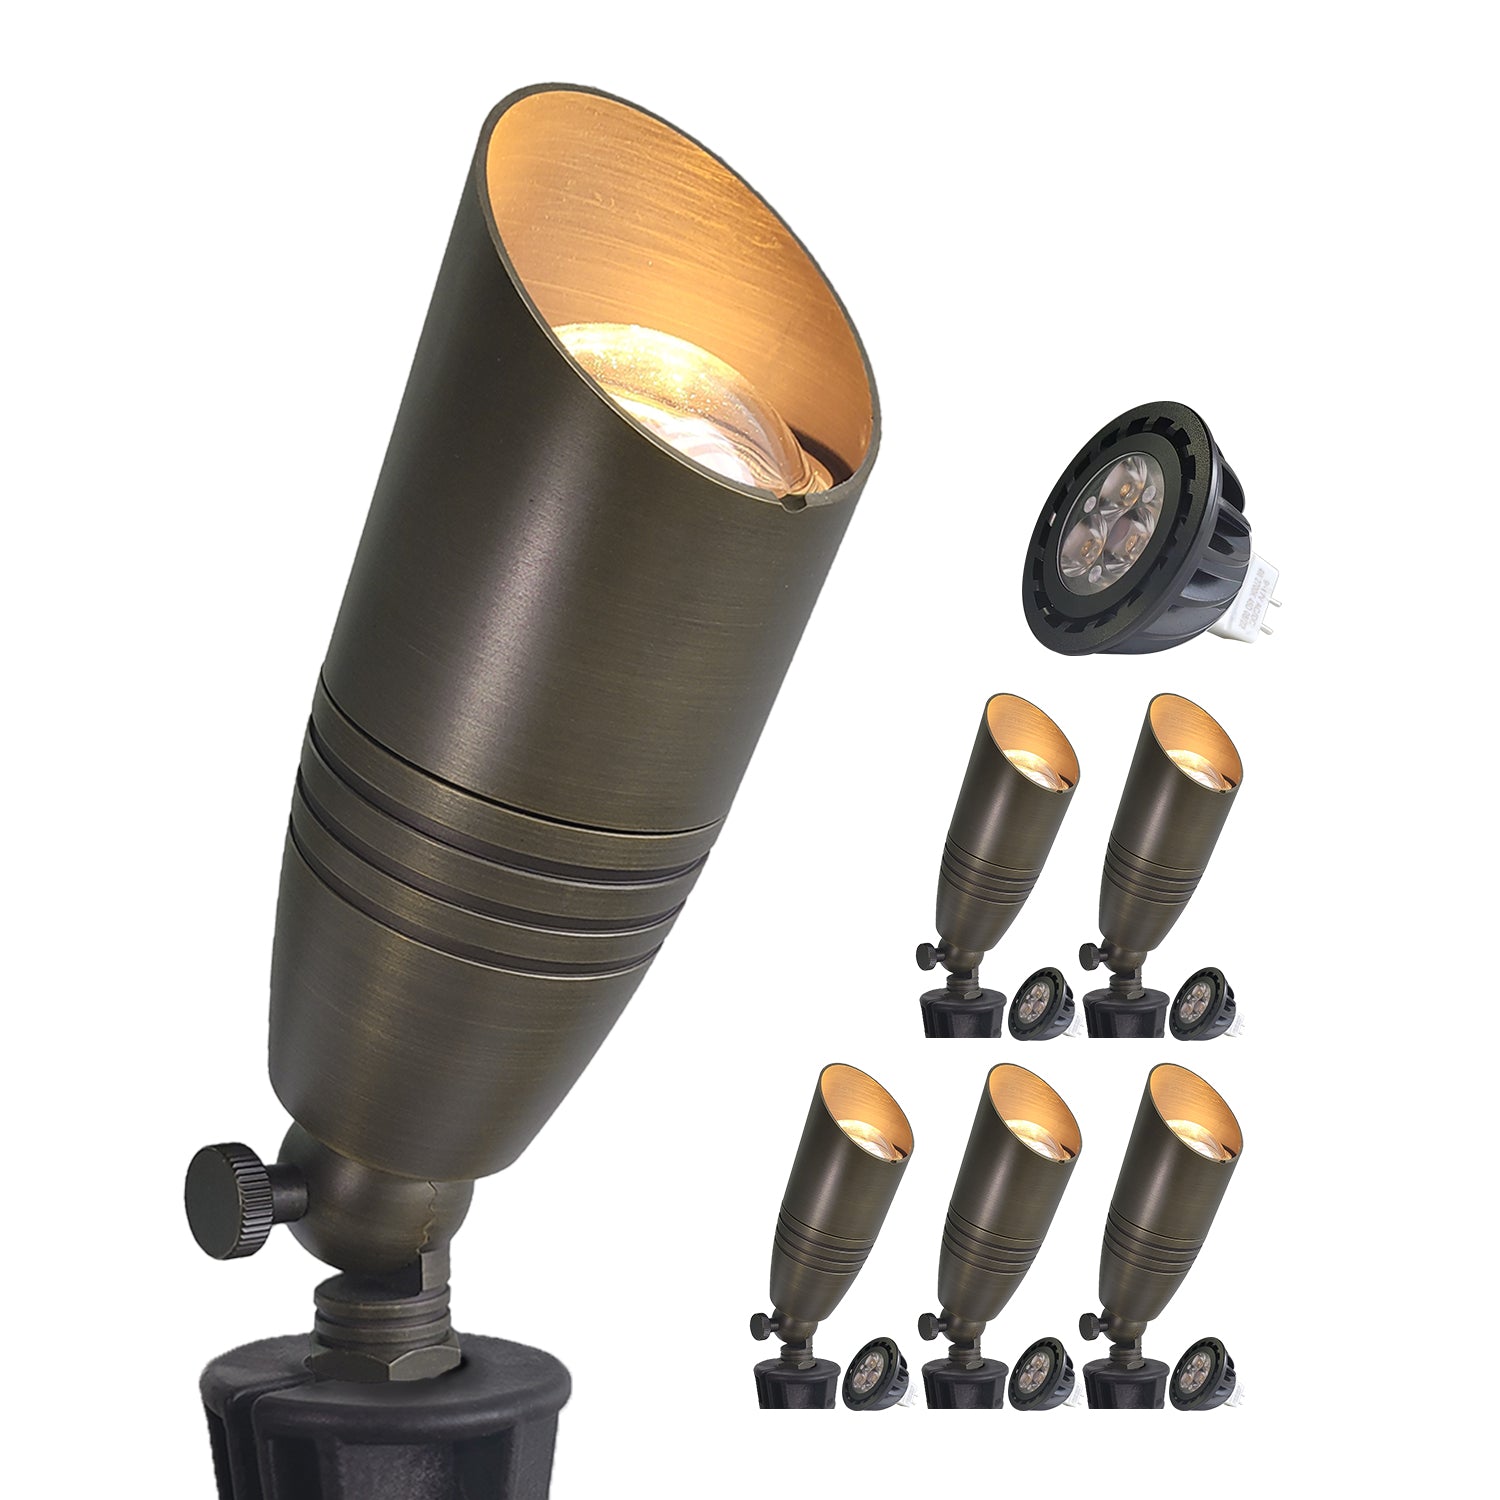 Brass LED landscape tree lighting set with low voltage outdoor spotlights COA102B showing individual light design and group arrangement.